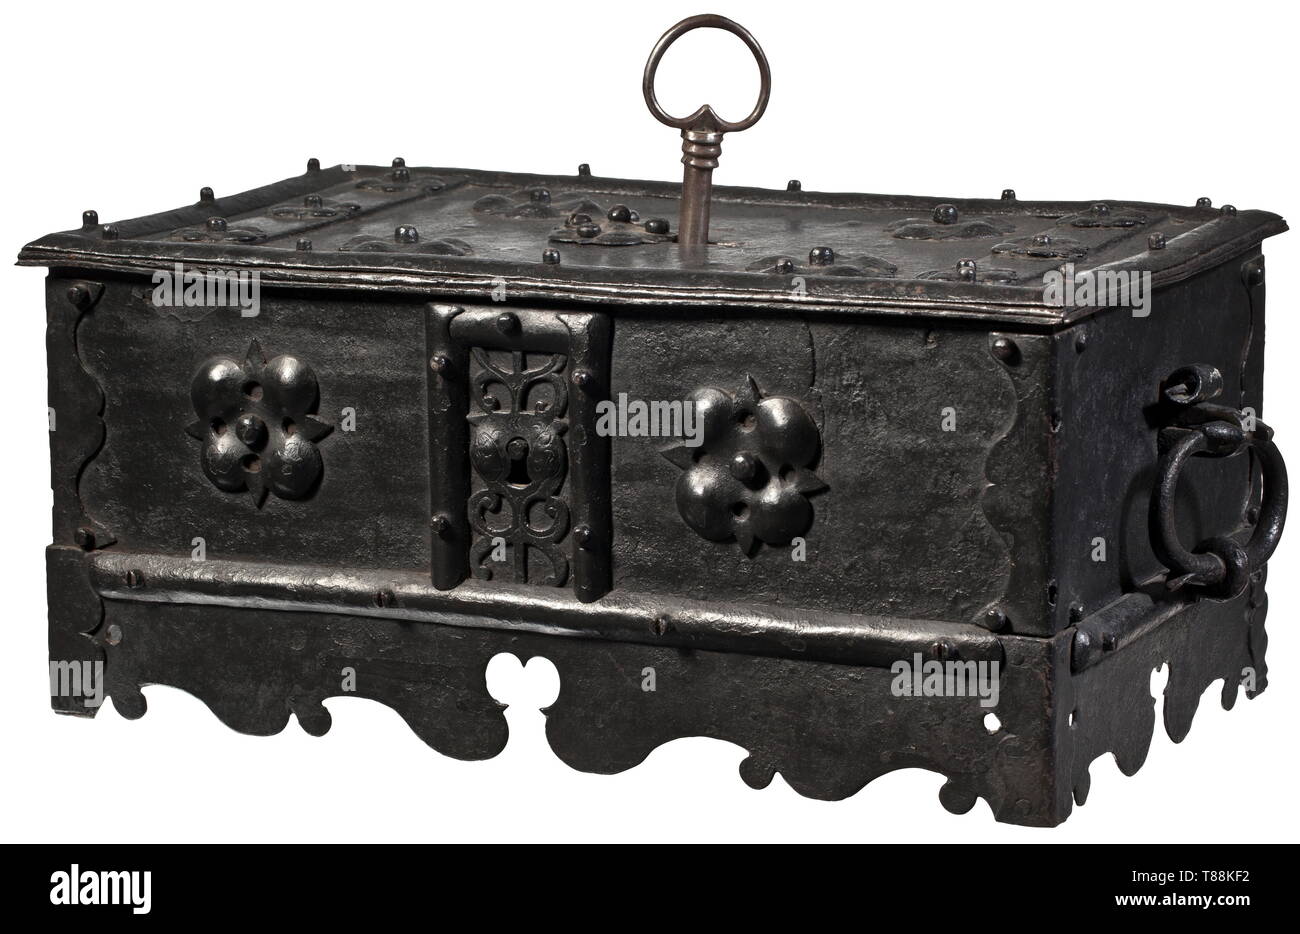 A German iron casket, 2nd half of the 17th century Body of sheet iron with curved base, the edges reinforced with riveted bands and decorated with likewise riveted chased rosettes. False lock with openwork escutcheon at front. Hinged lid with central keyhole, original(?) key and four latches. Inside drawer on the lower left. Two movable side handles. Size 36 x 23 x 16 cm. historic, historical, handicrafts, handcraft, craft, object, objects, stills, clipping, clippings, cut out, cut-out, cut-outs, 17th century, Additional-Rights-Clearance-Info-Not-Available Stock Photo